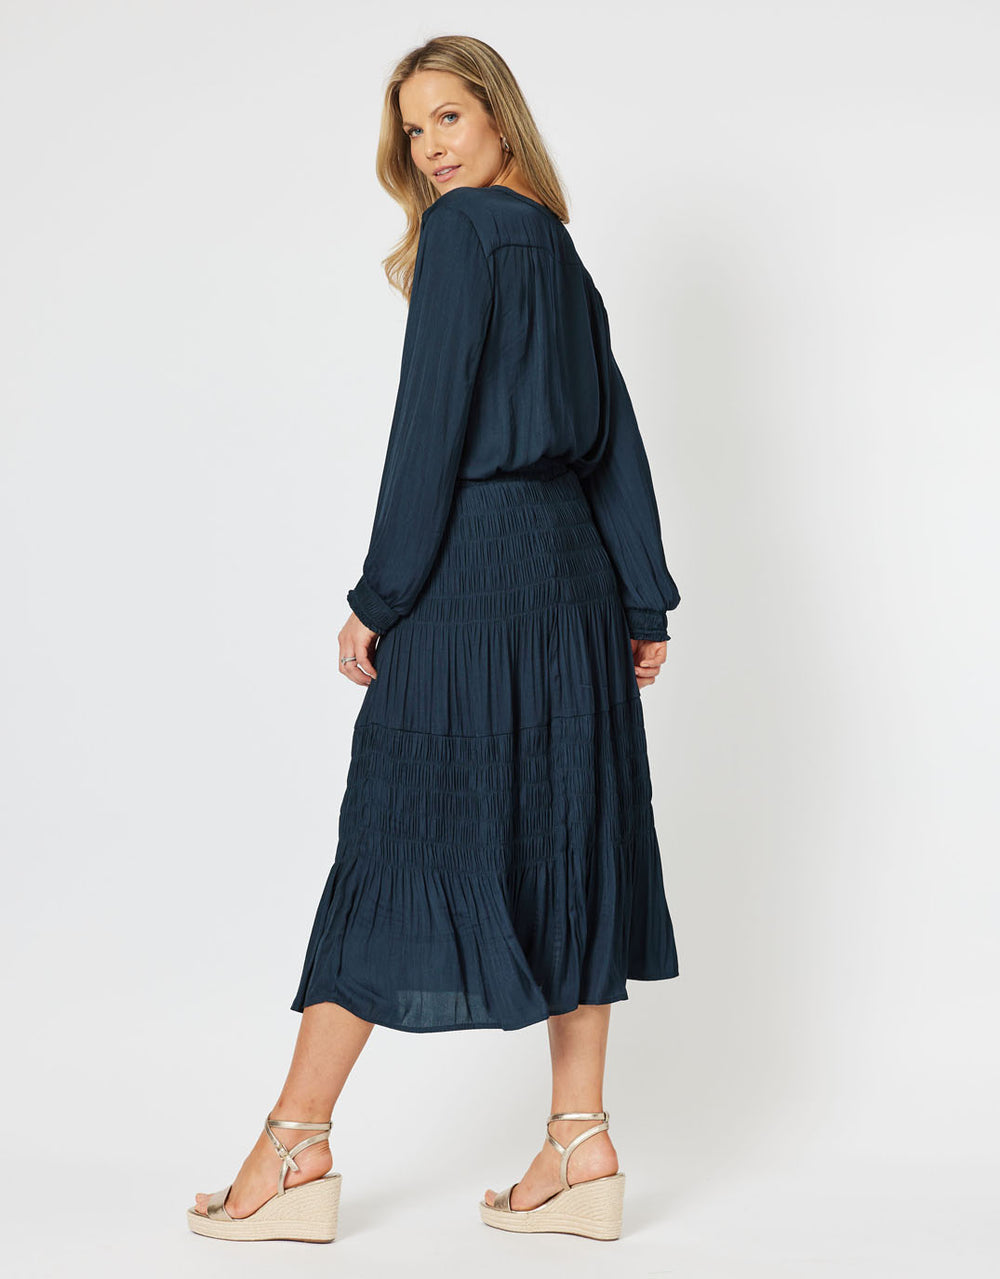 hammock-and-vine-luxe-shirred-skirt-navy-womens-clothing